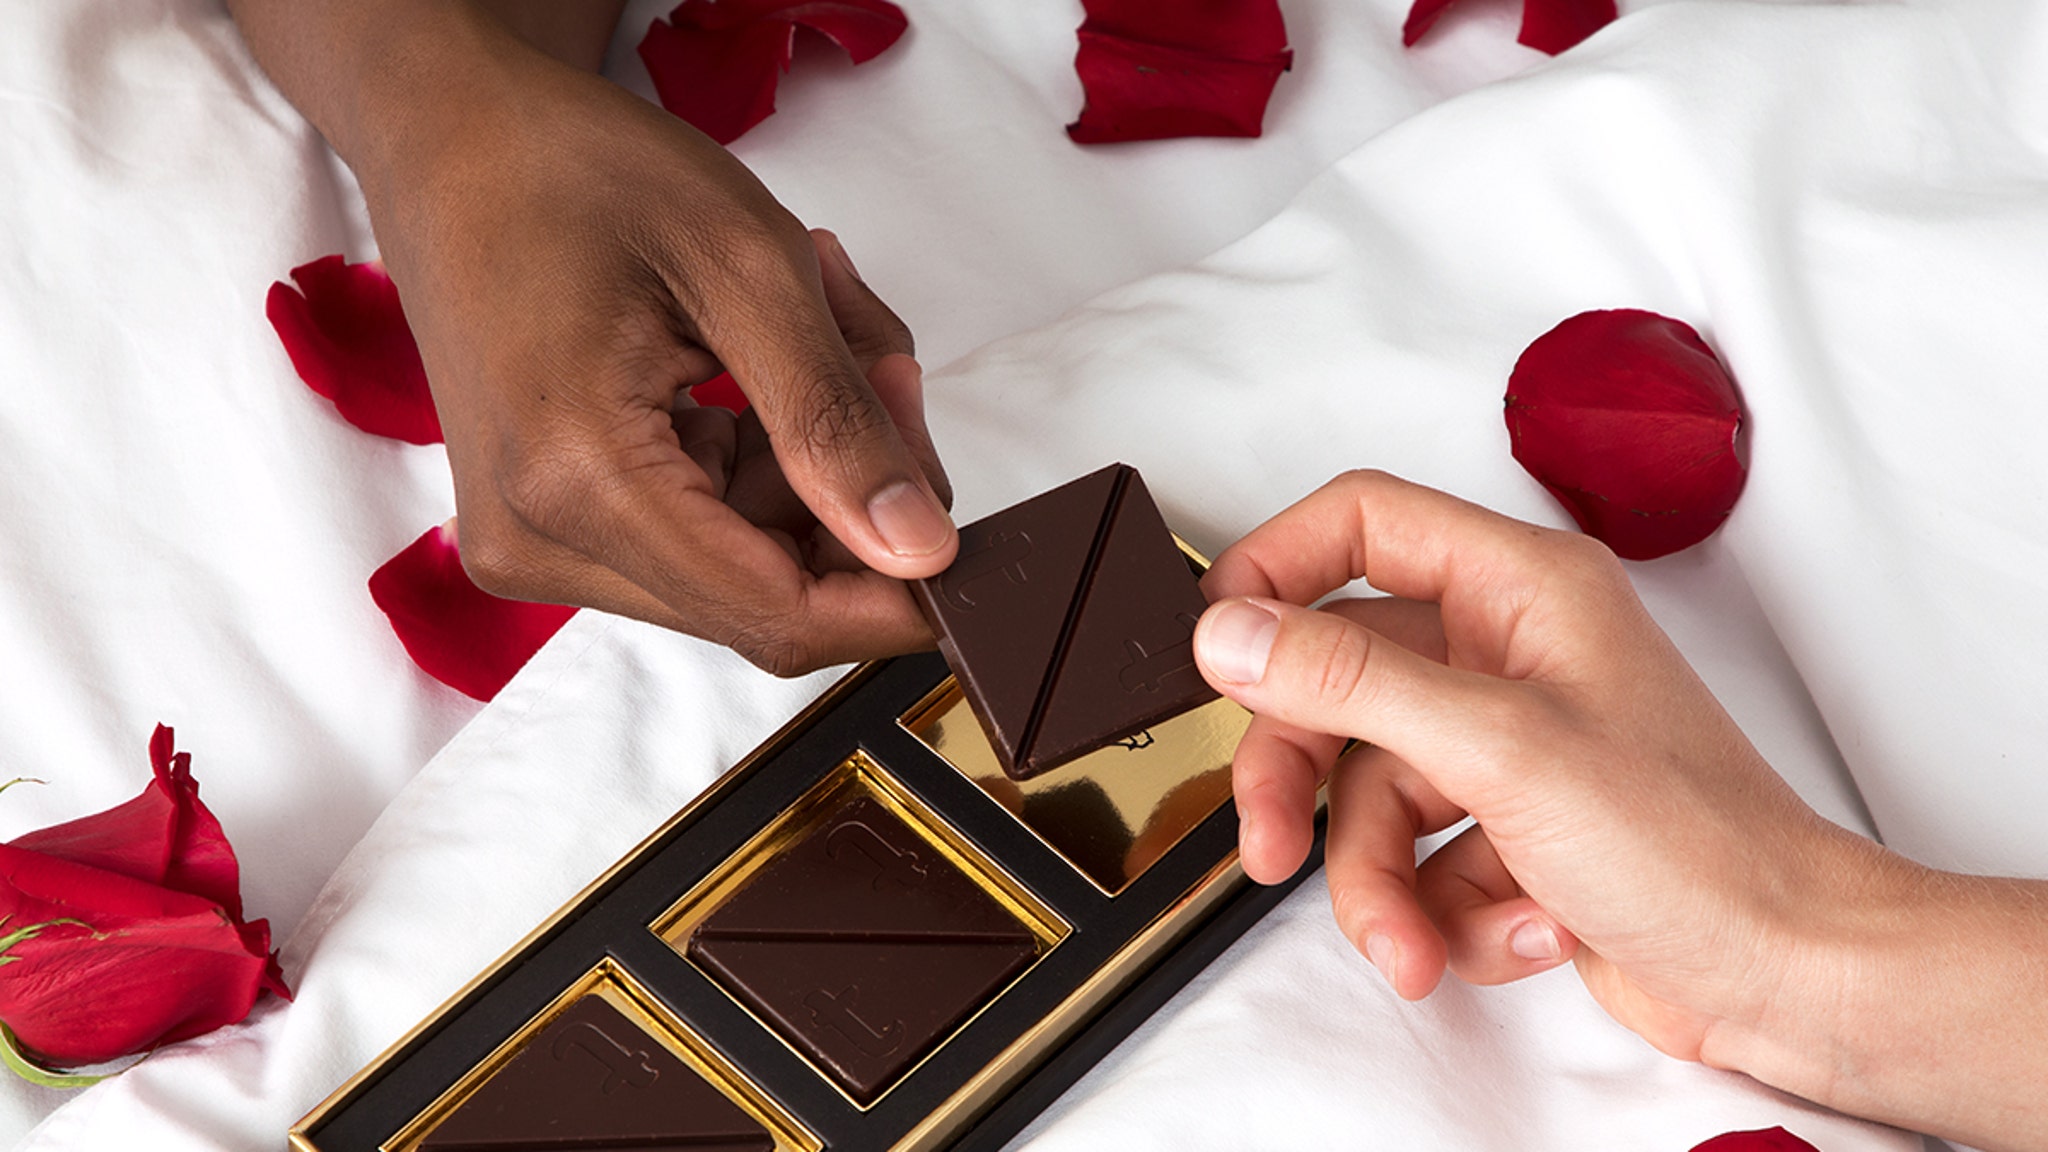 These Pleasure Tabs Of Sex Chocolate Are Going Viral